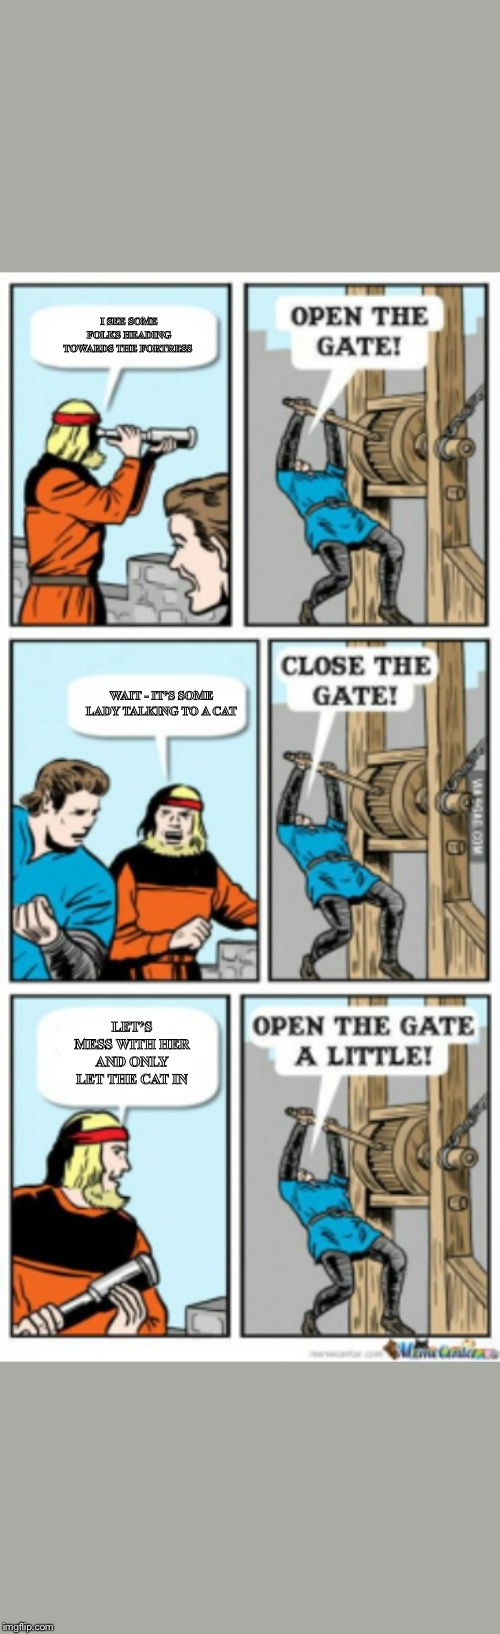 Open the gate a little | I SEE SOME FOLKS HEADING TOWARDS THE FORTRESS; WAIT - IT’S SOME LADY TALKING TO A CAT; LET’S MESS WITH HER AND ONLY LET THE CAT IN | image tagged in open the gate a little | made w/ Imgflip meme maker